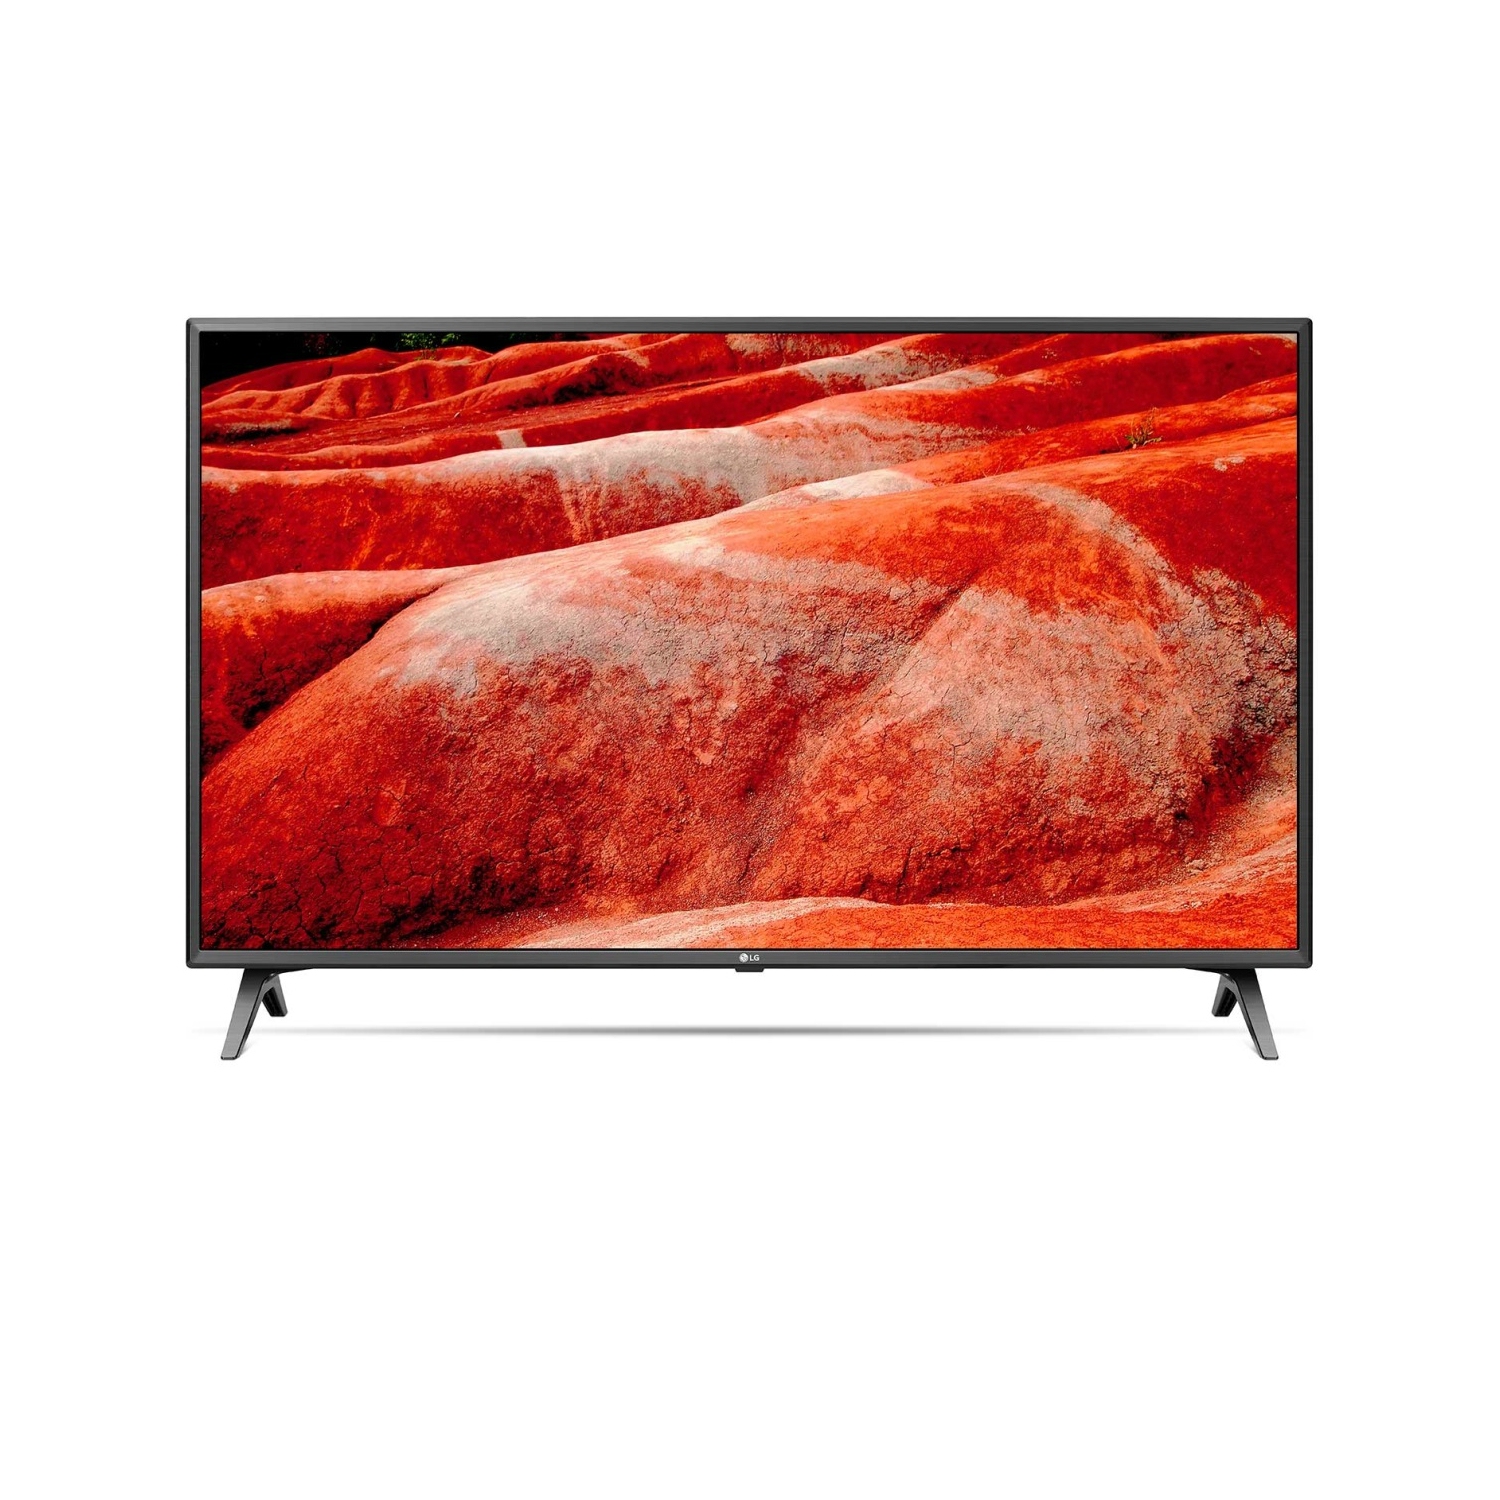 LG 50" 4K UHD TV - SMART - webOs - Freeview HD - Freesat HD - A Rated - 0